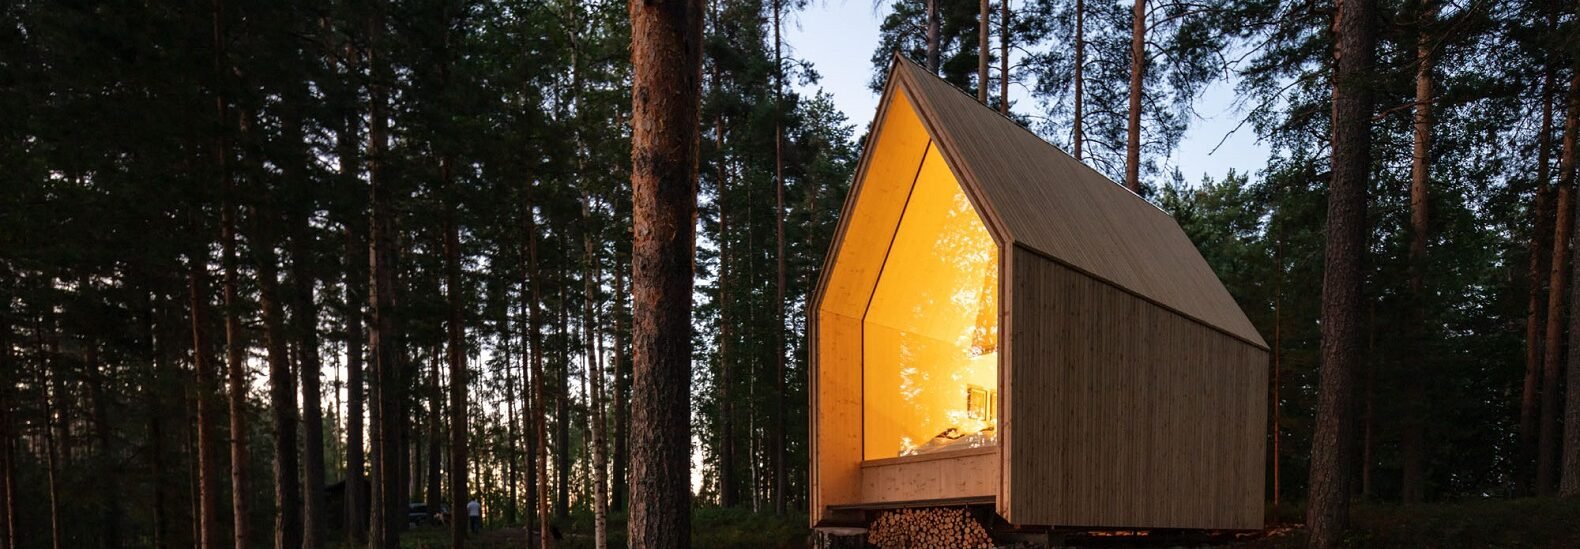 Meditation cottage fits on the tiniest lakefront space